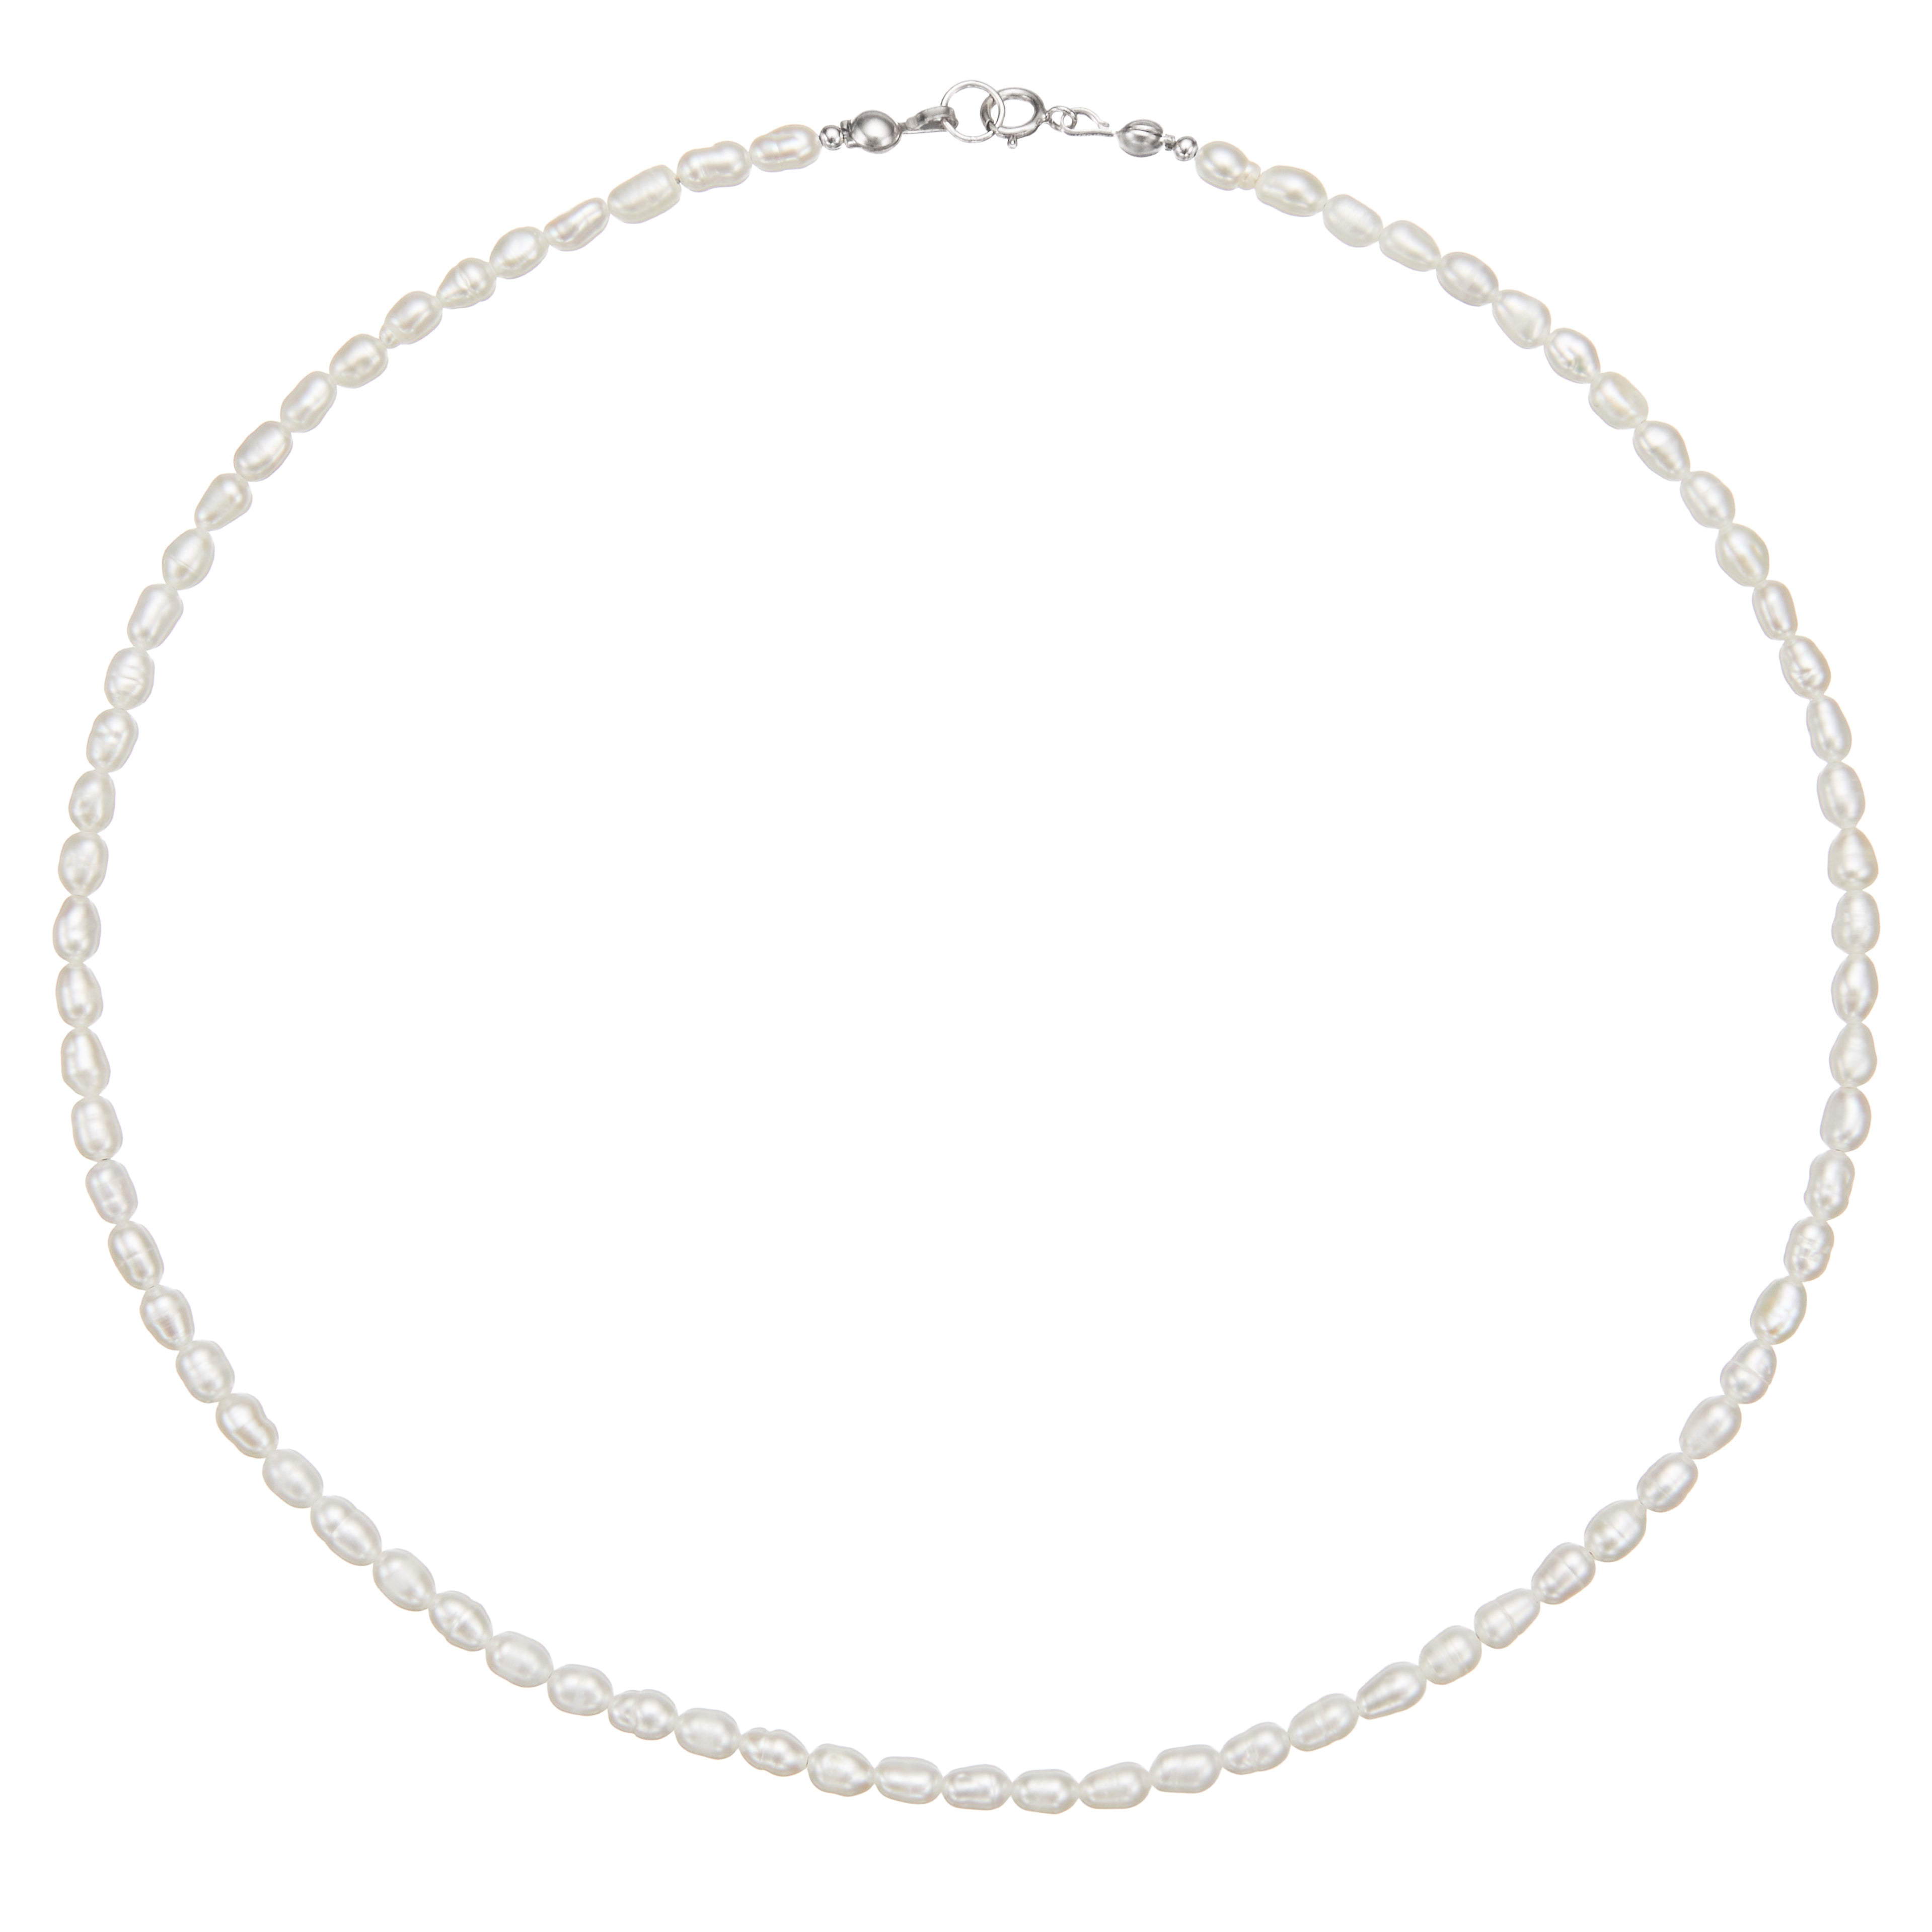 Silver seed pearl choker on a white background